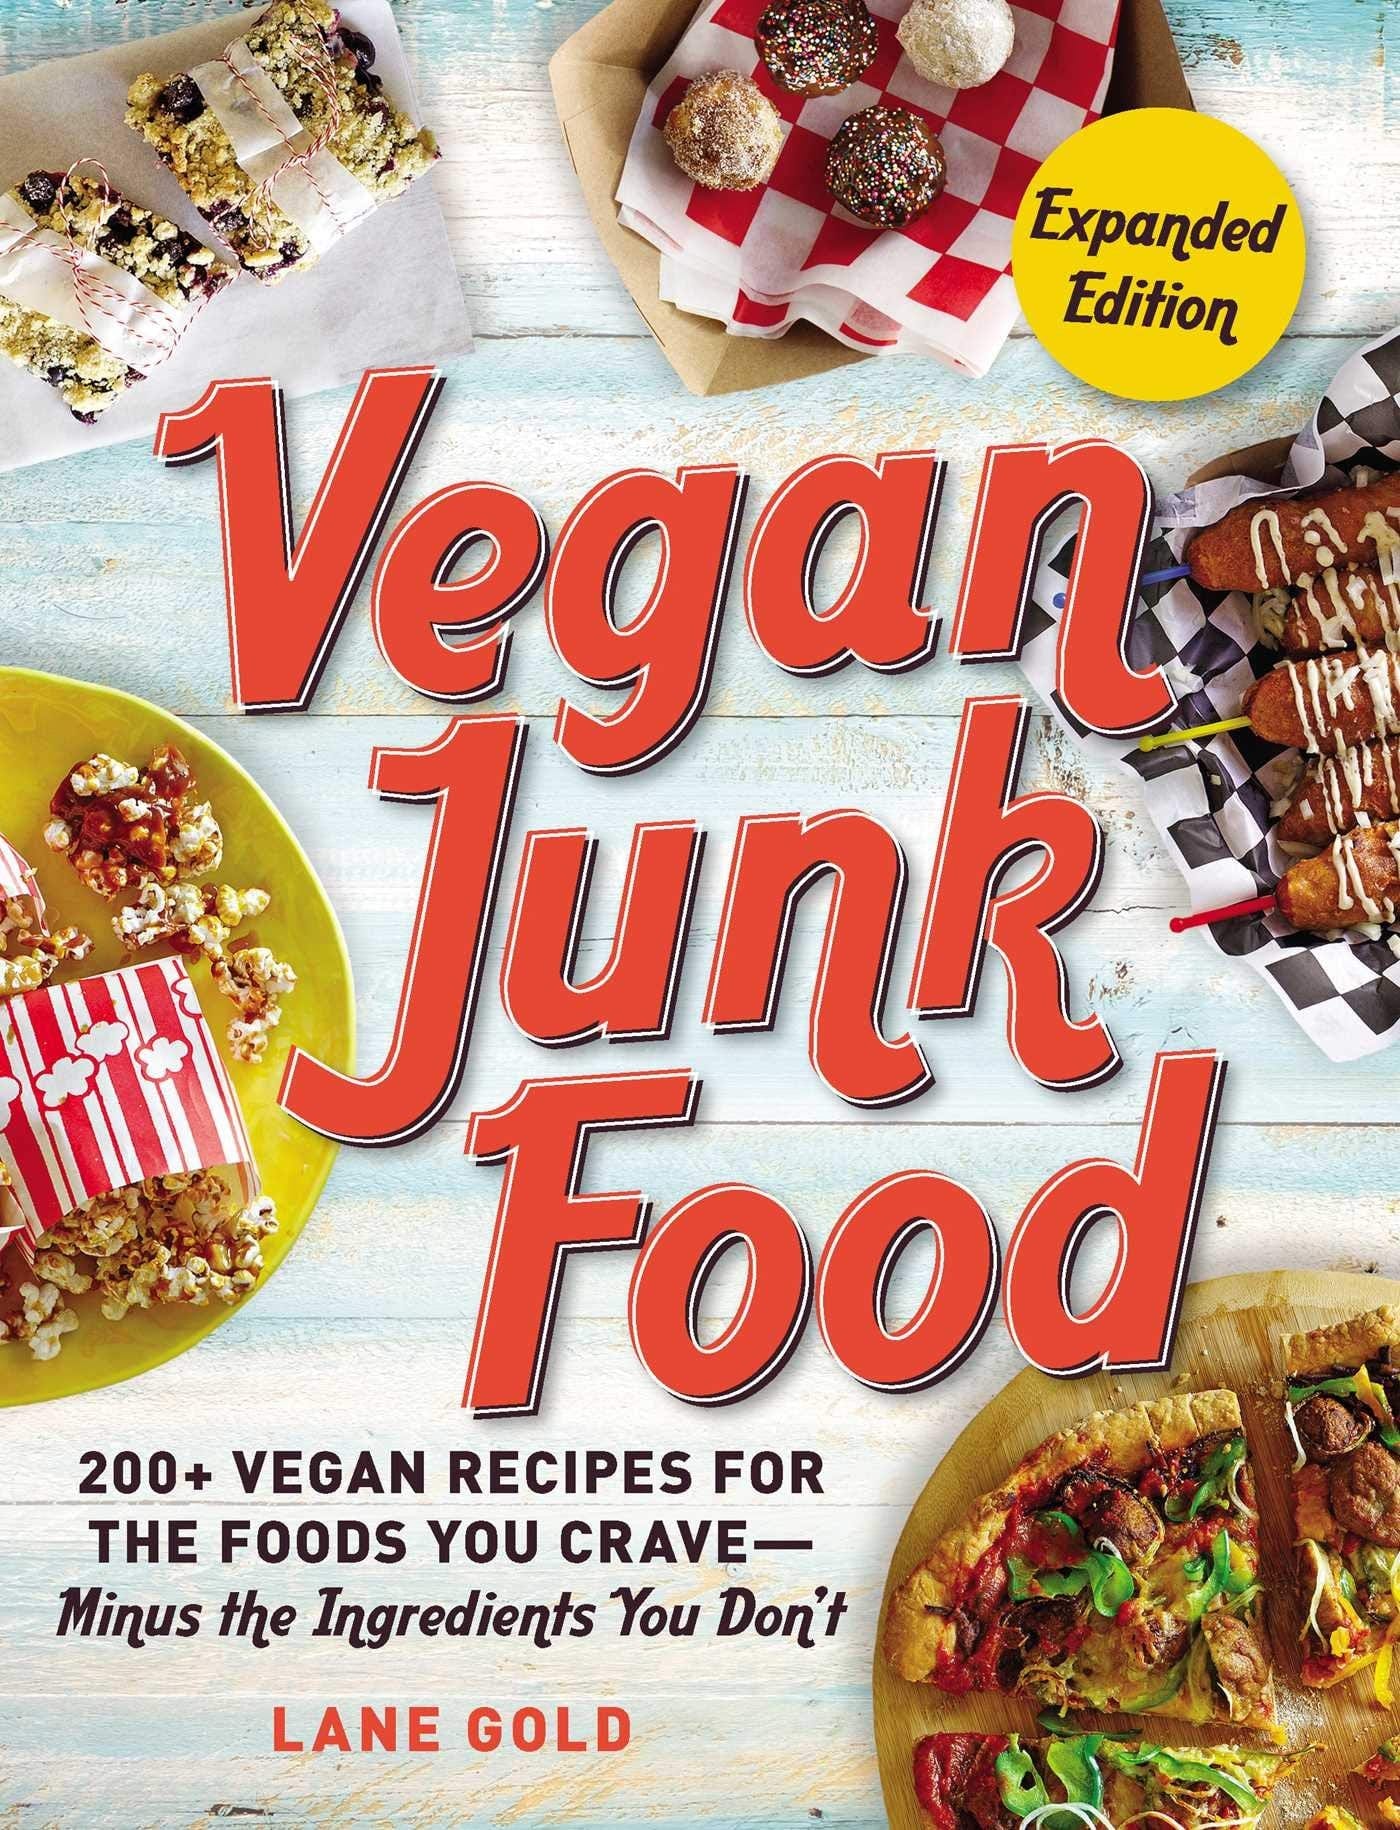 Vegan Junk Food: 200+ Vegan Recipes for the Foods You Crave Minus the Ingredients You Don't - Expanded Edition - Third Eye